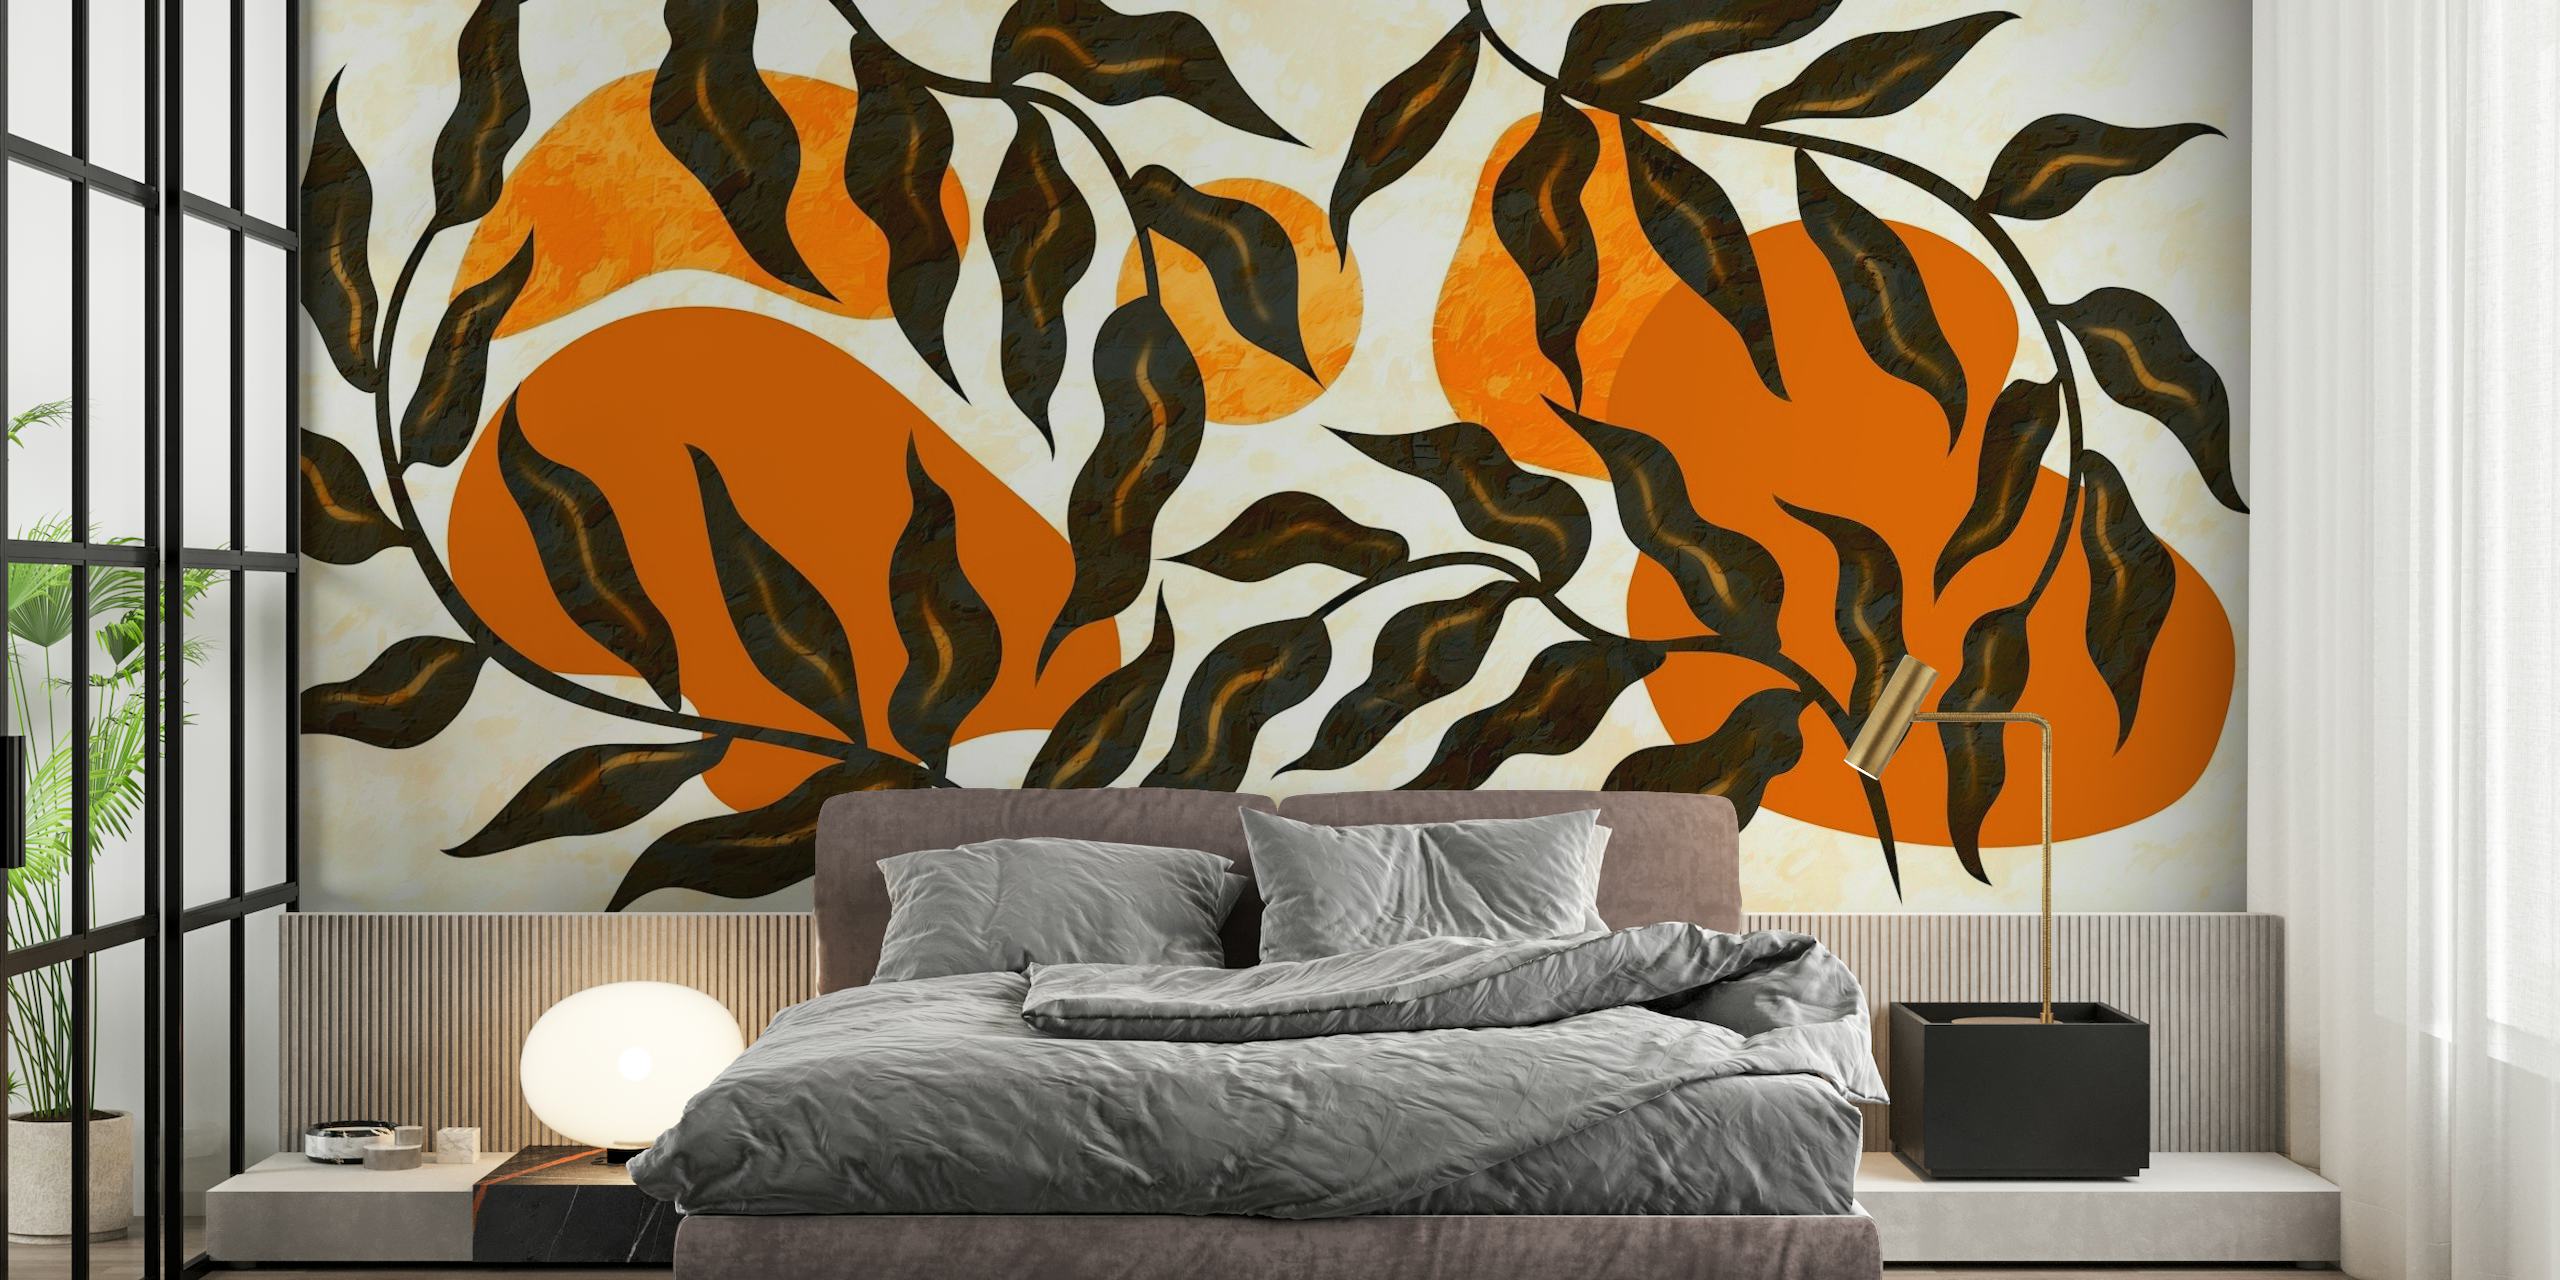 Sunrise Luxury Leaves wall mural with warm apricot and black botanical patterns